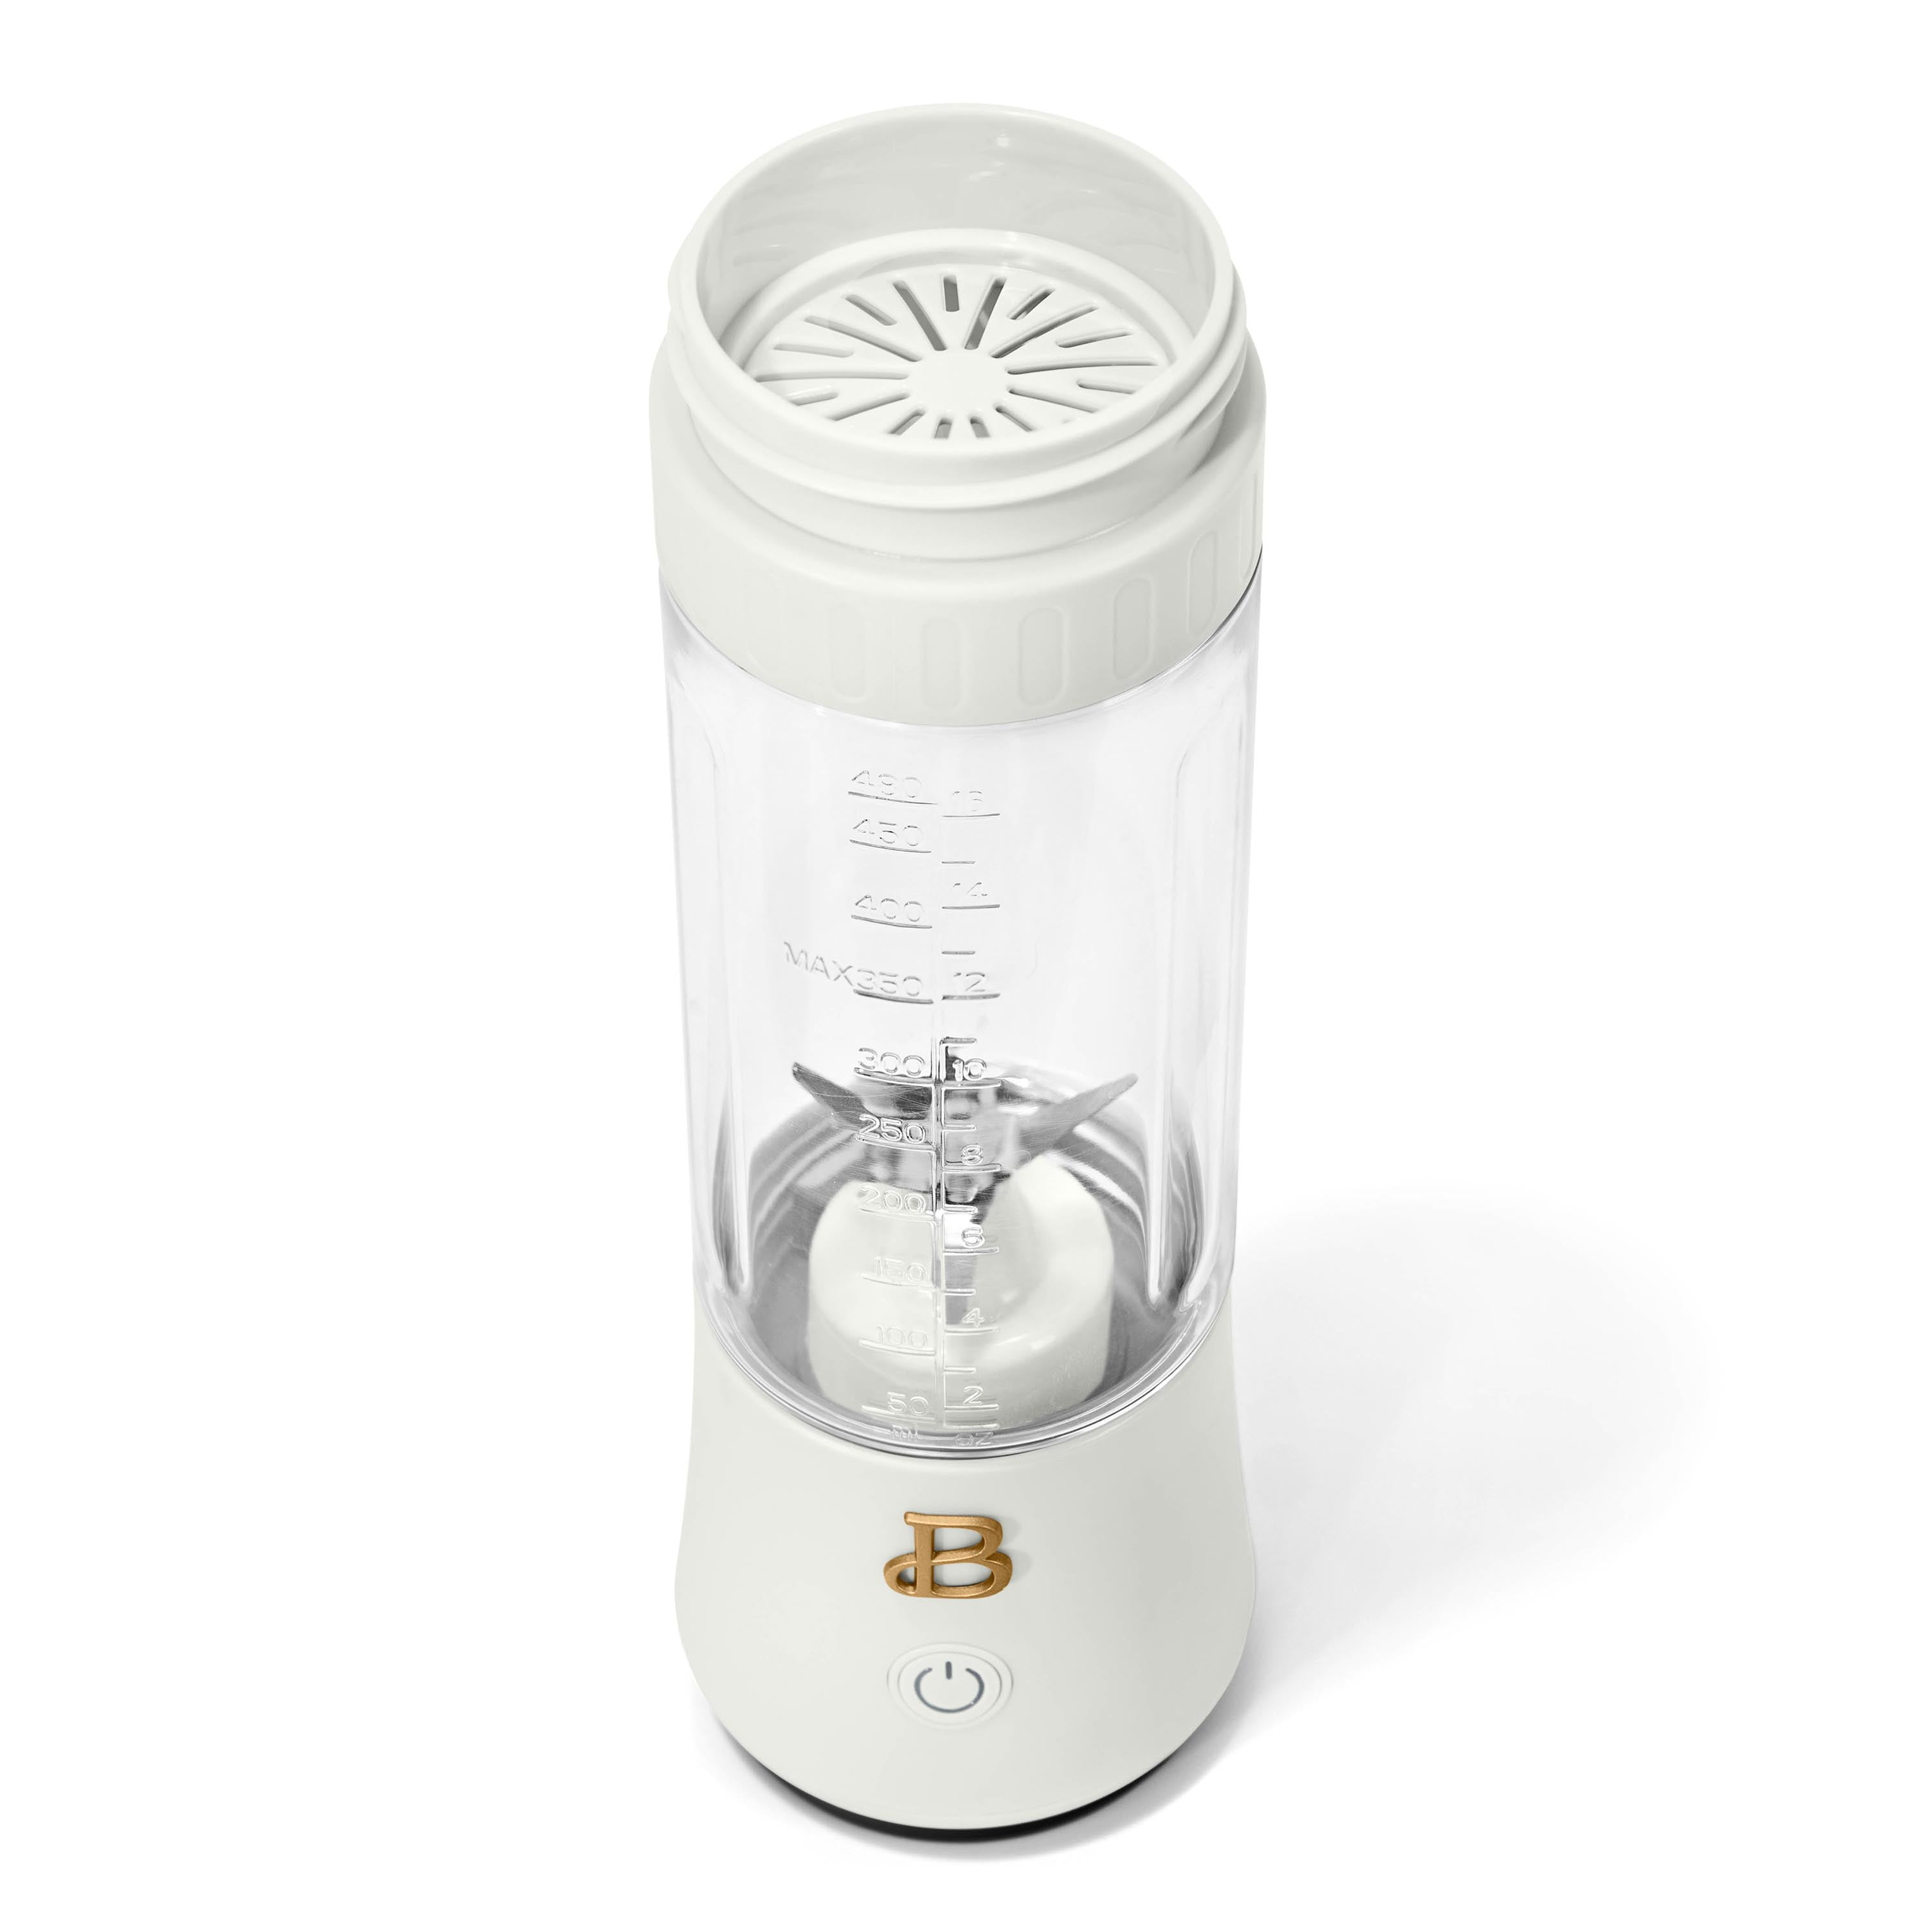 Best Portable Blender for Travel and Crushing Ice, by Dyno Bazaar